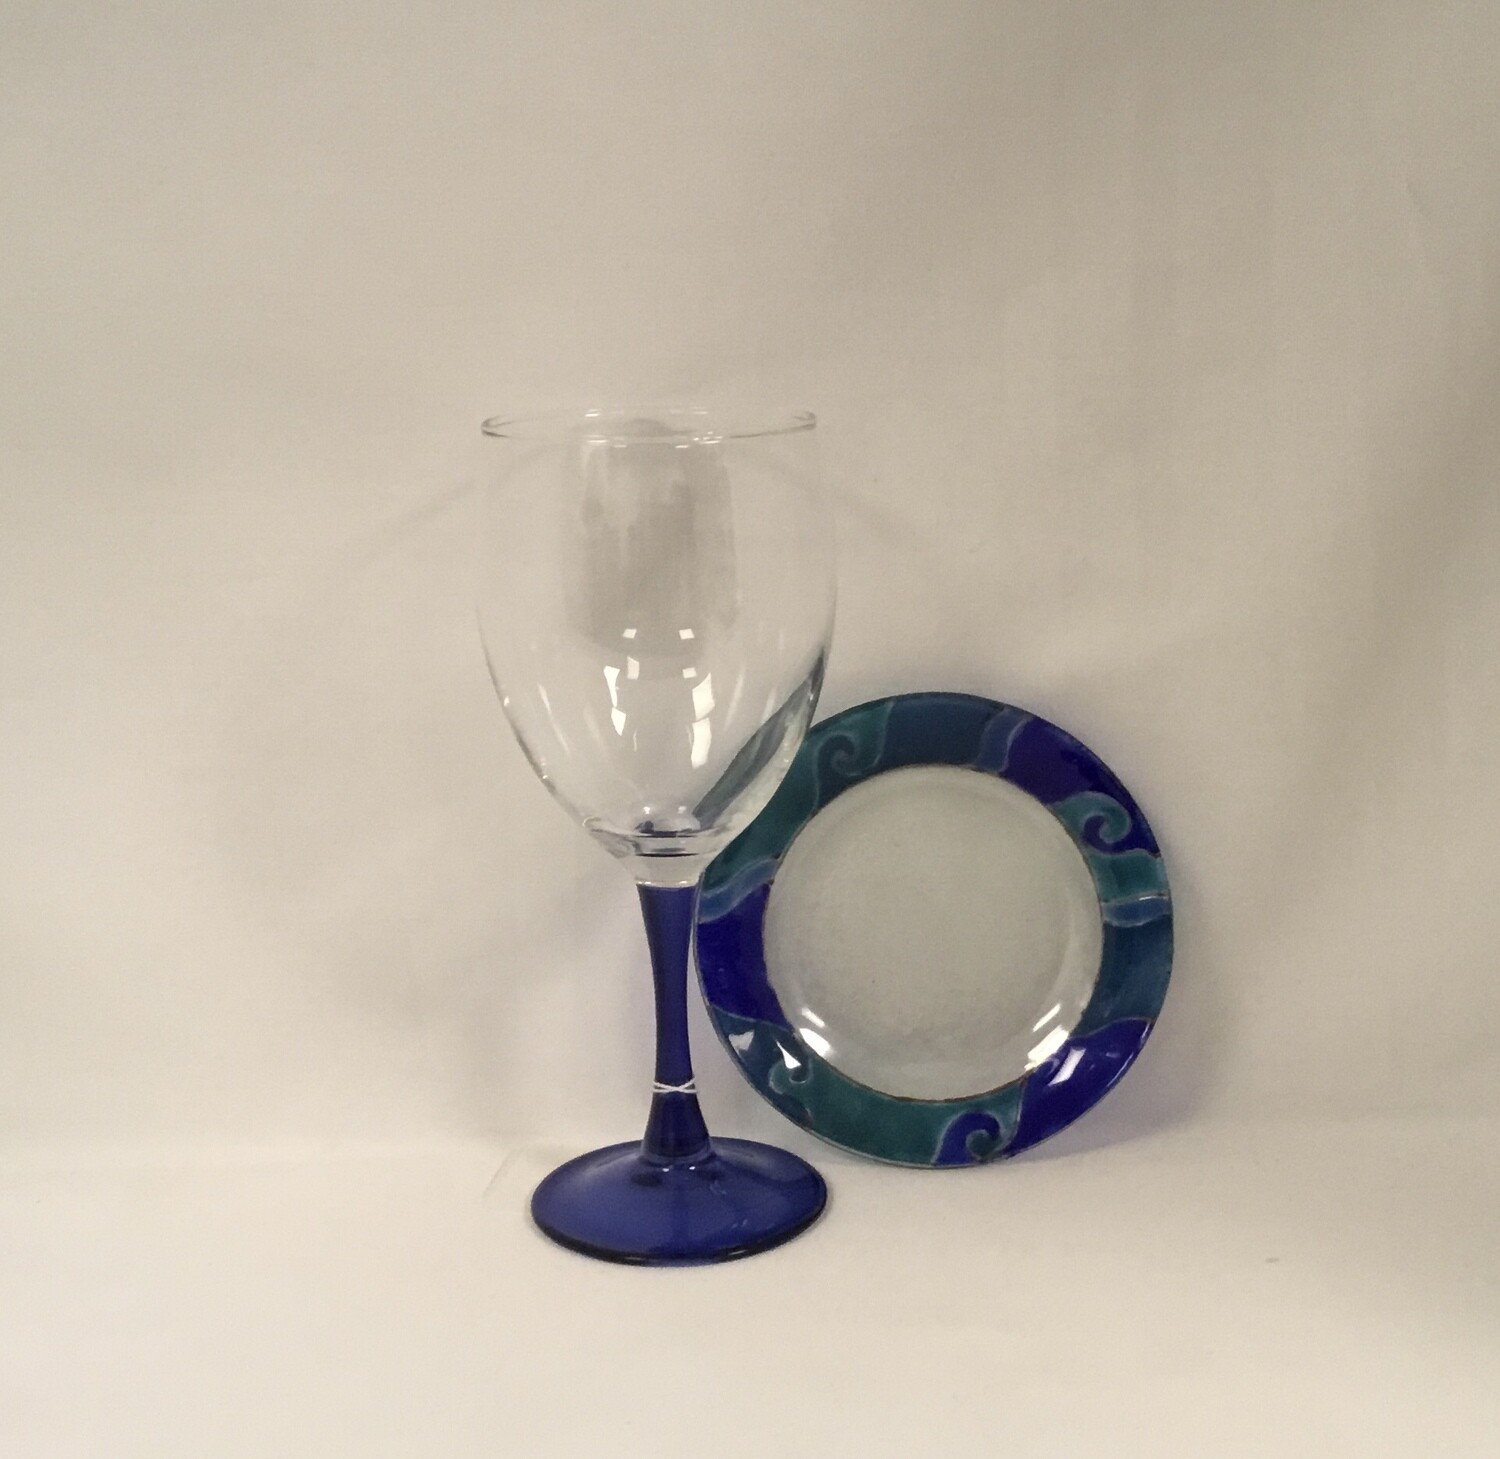 Glass Kiddush Cup; Blue Stem on Blue Colored Tray